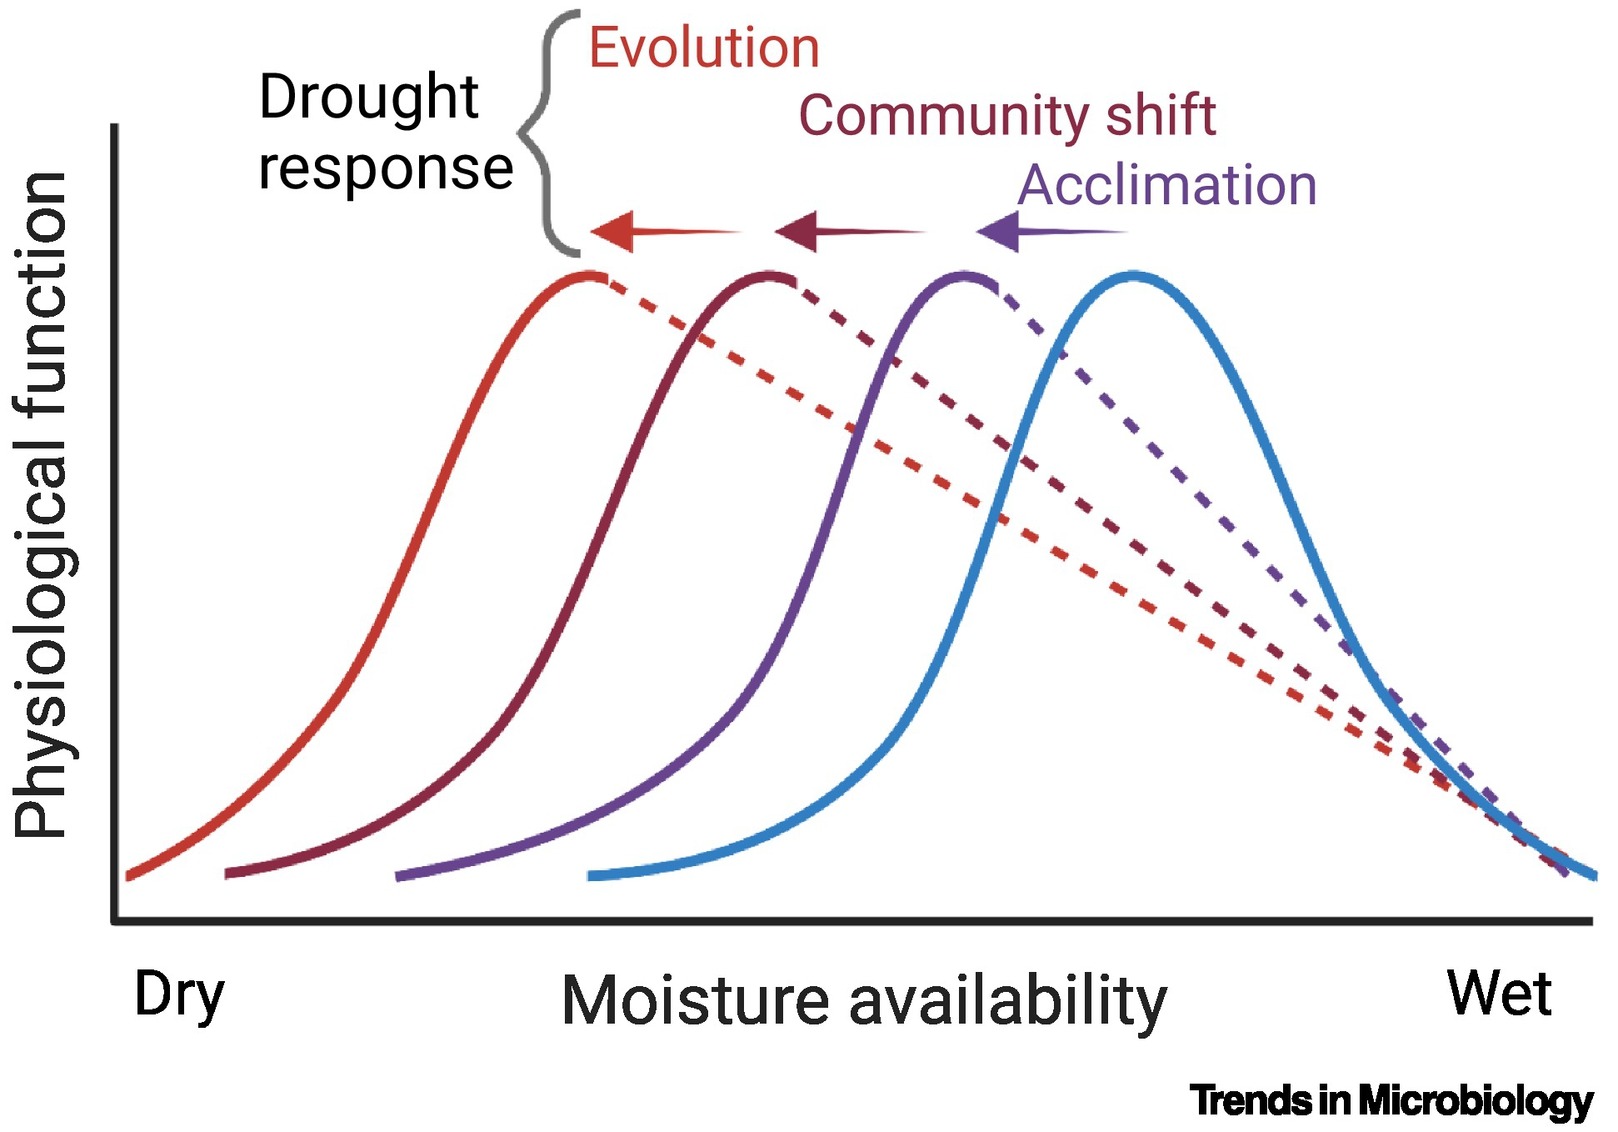 Physiological response curves may shift as soil microbiomes respond to drought. In the short term (minutes to days), physiological acclimation may help to sustain function, such as soil carbon decomposition. Over weeks to decades, community shifts and evolution could alter response curves to maintain functioning under dry conditions. Broken lines indicate potential variation in the breadth of the shifted response curves. Graphic: Evans, et al., 2022 / Functional Ecology